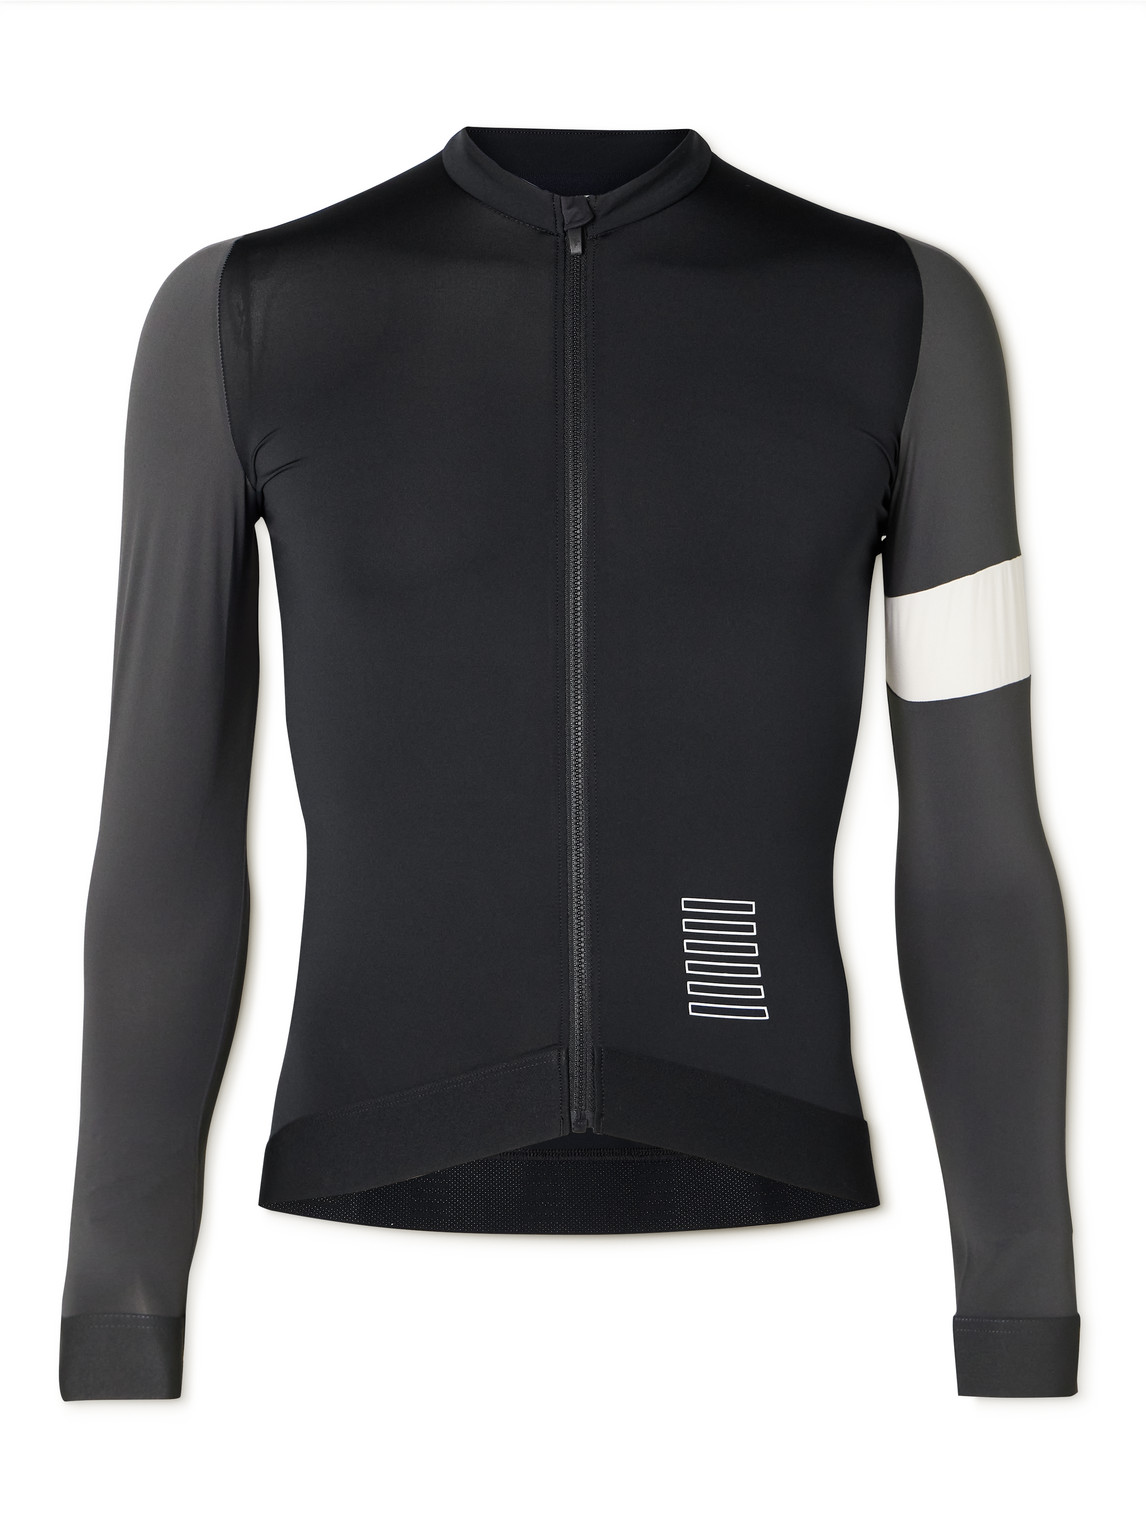 Rapha Pro Team Cycling Jersey In Black